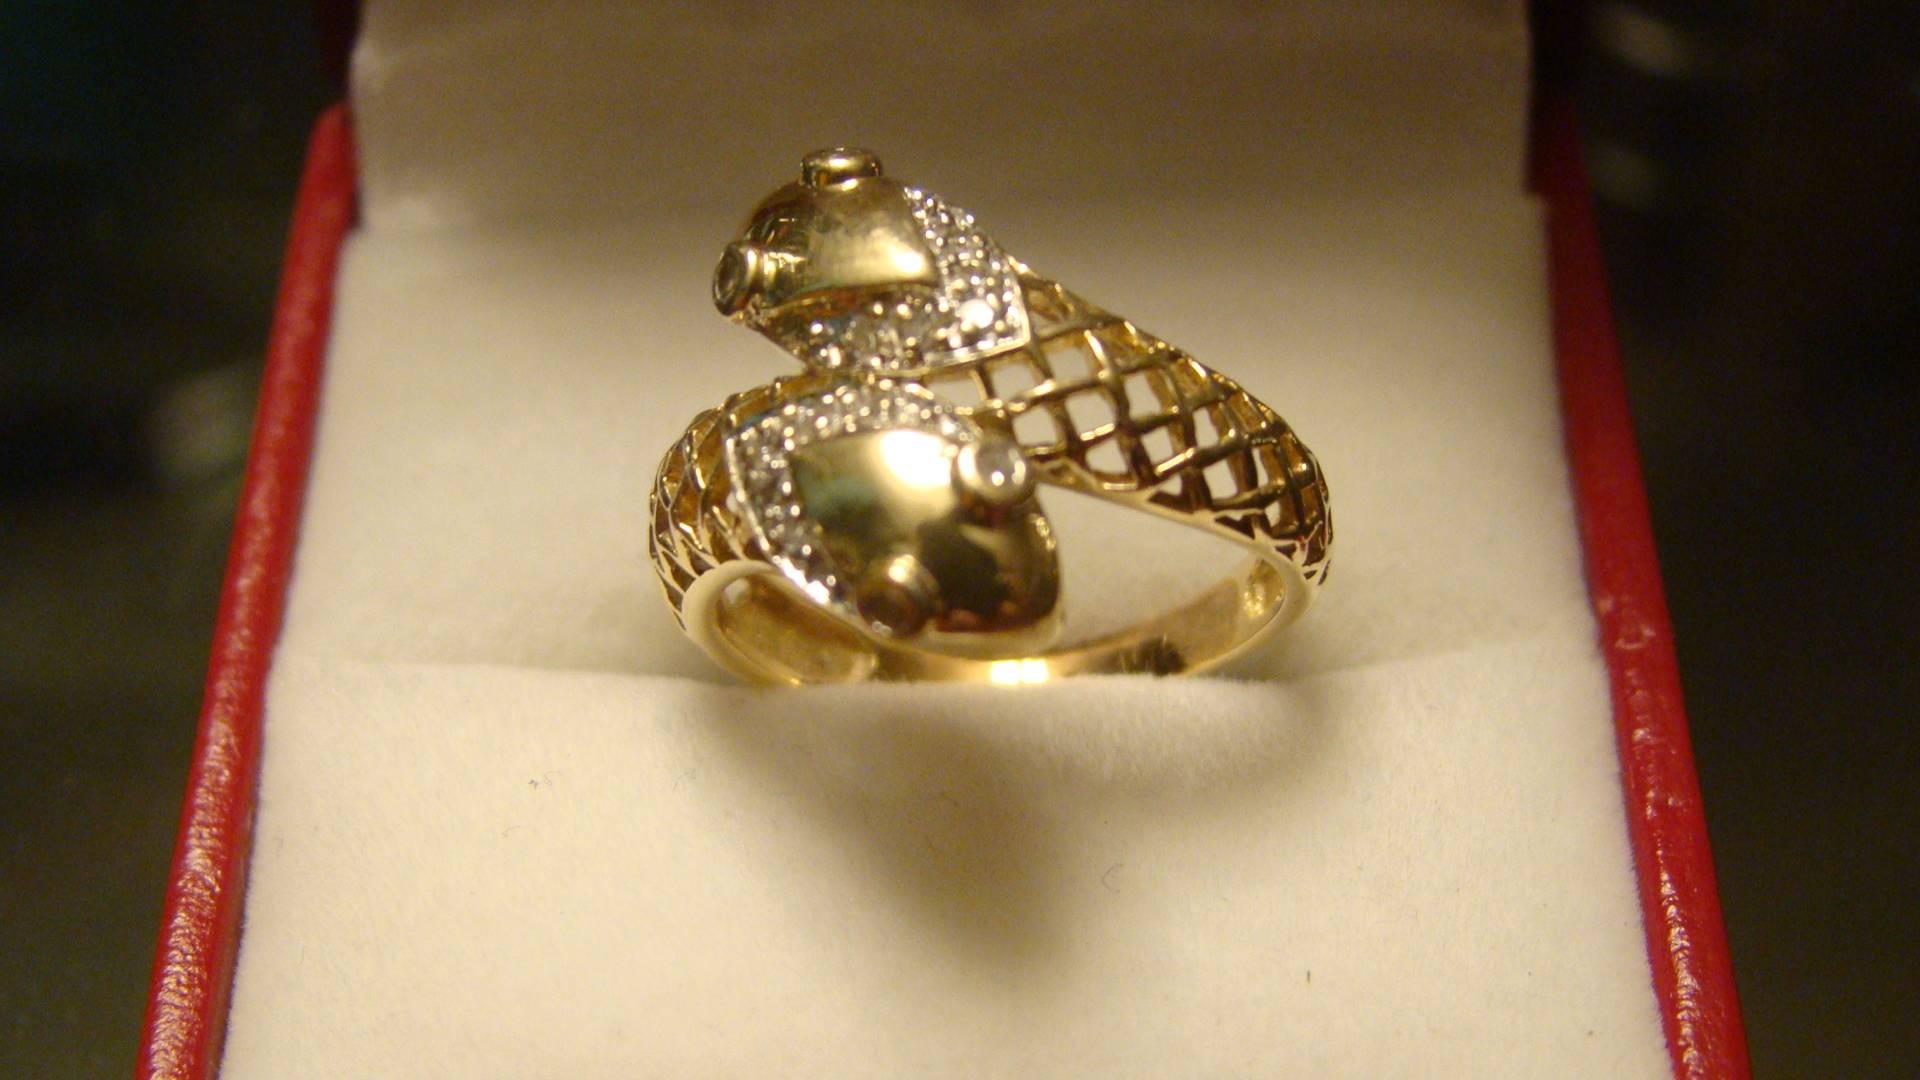 Art Deco Antique Gold Double Head Snake Ring with Diamond Eyes